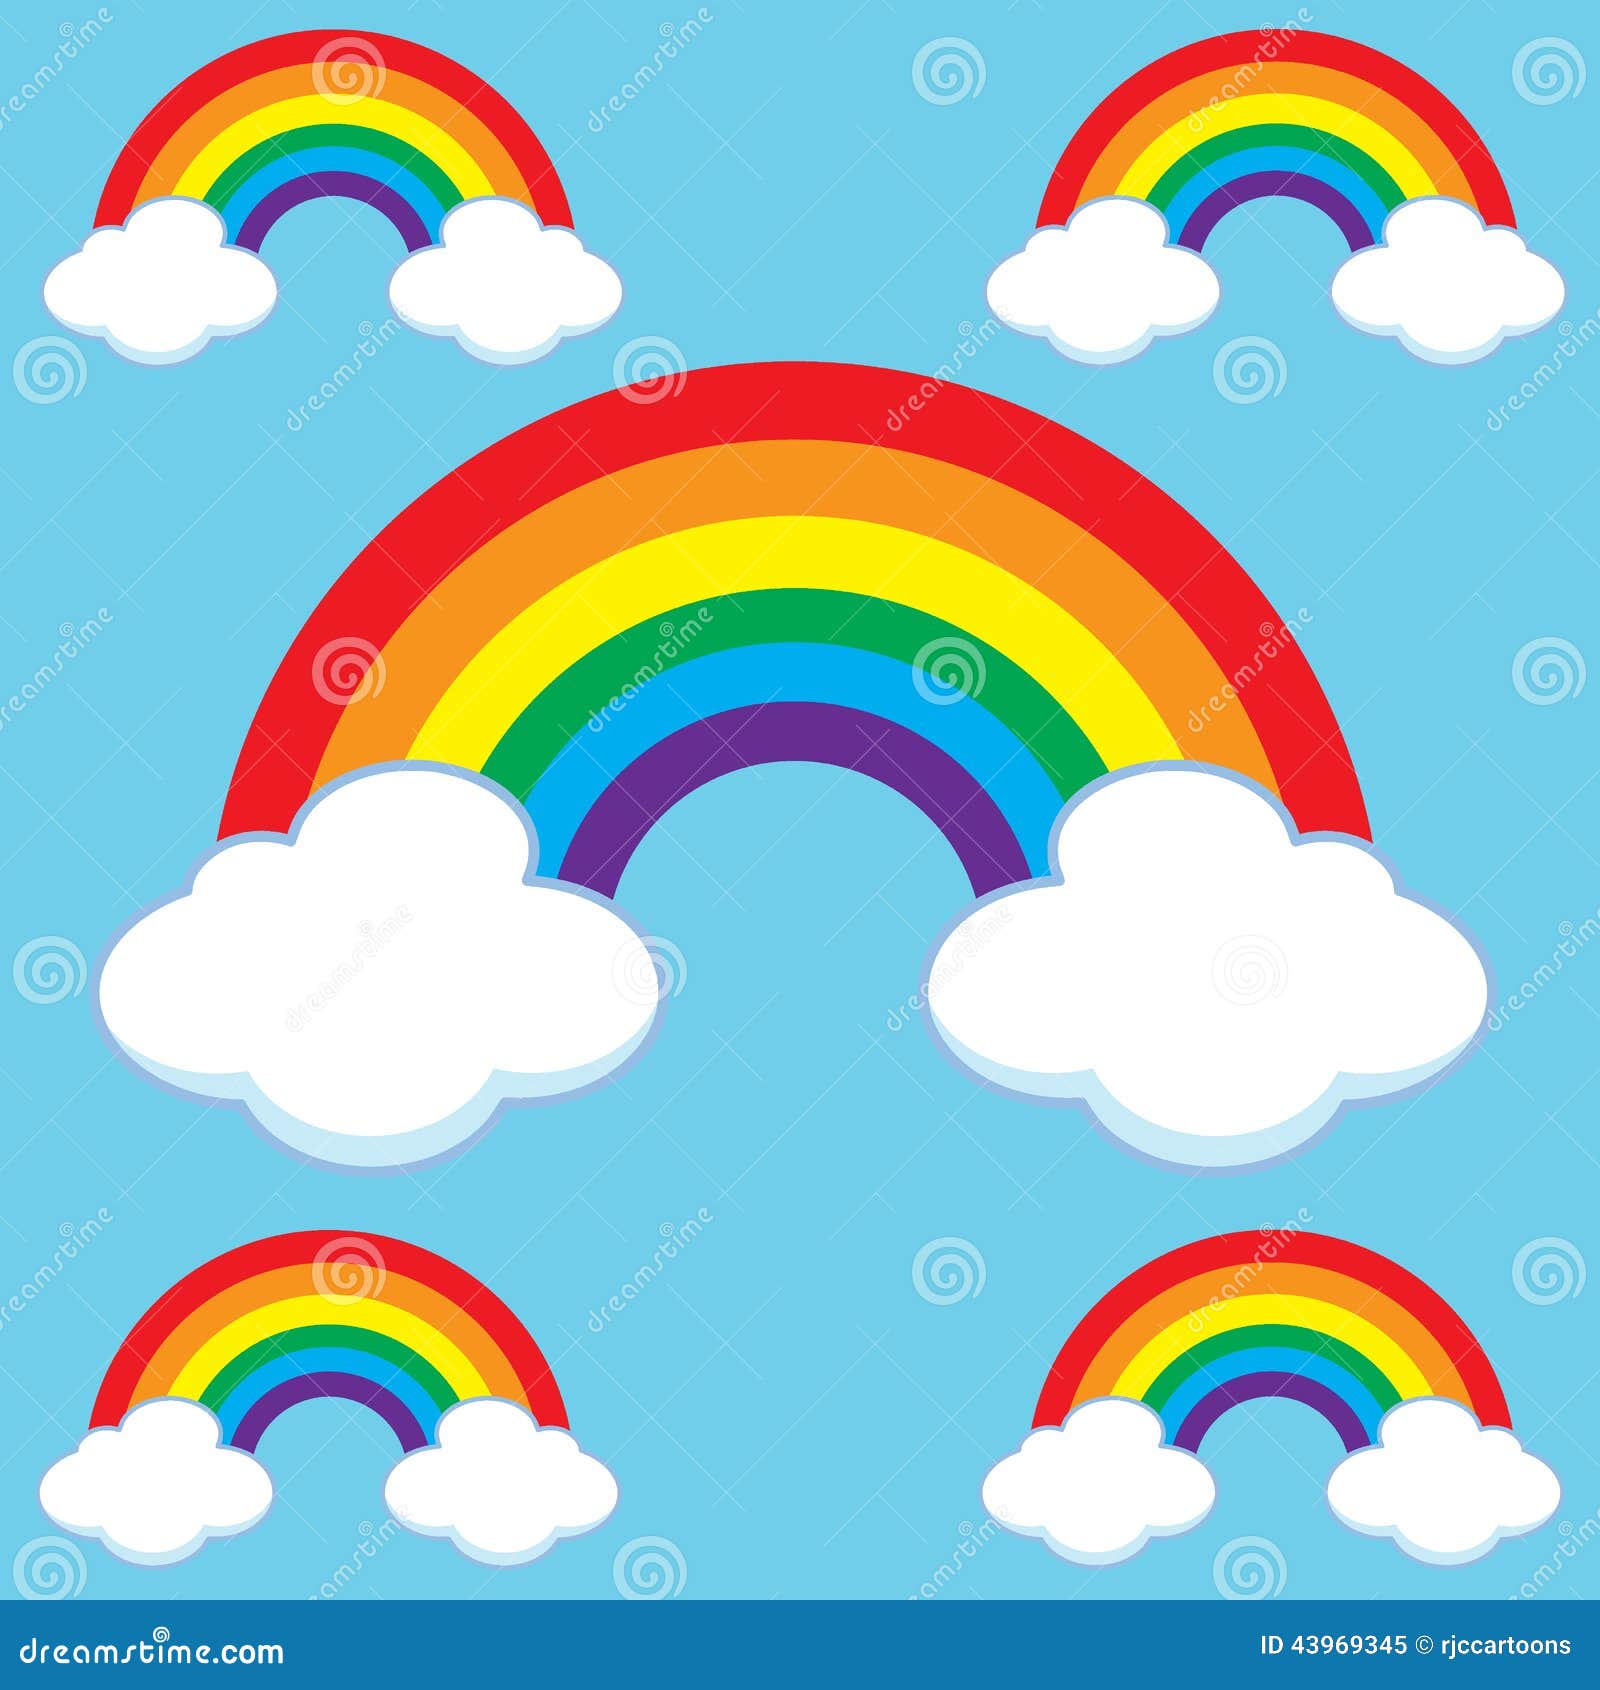 Cartoon Rainbows and Clouds Set Stock Vector - Illustration of clouds,  collection: 43969345